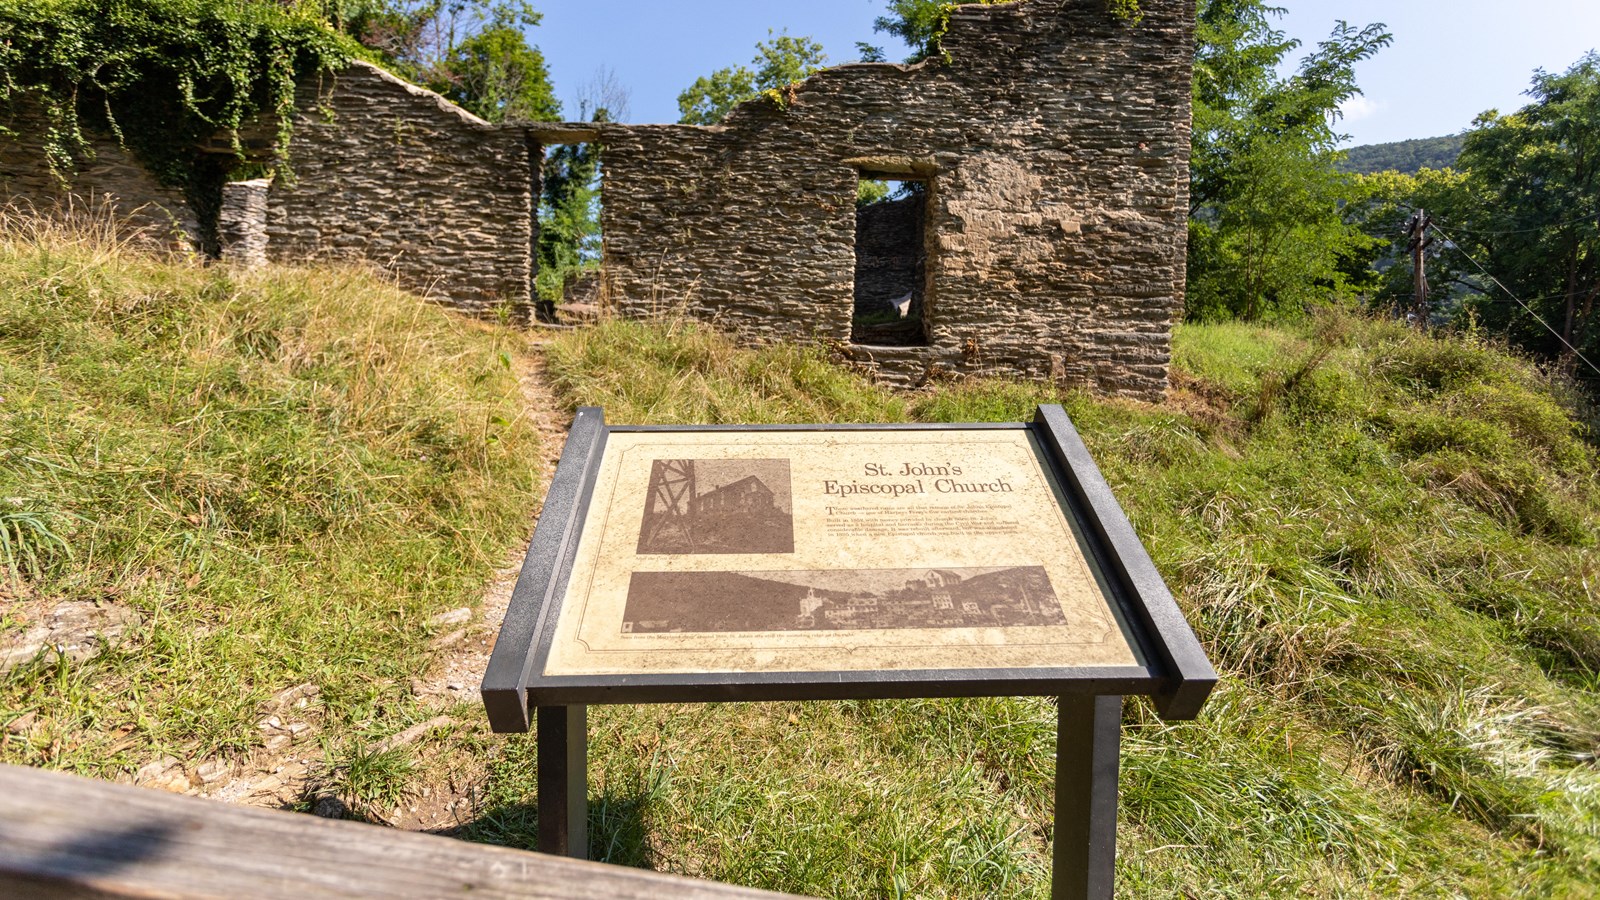 Exhibit panel with historic photos of stone church and title 